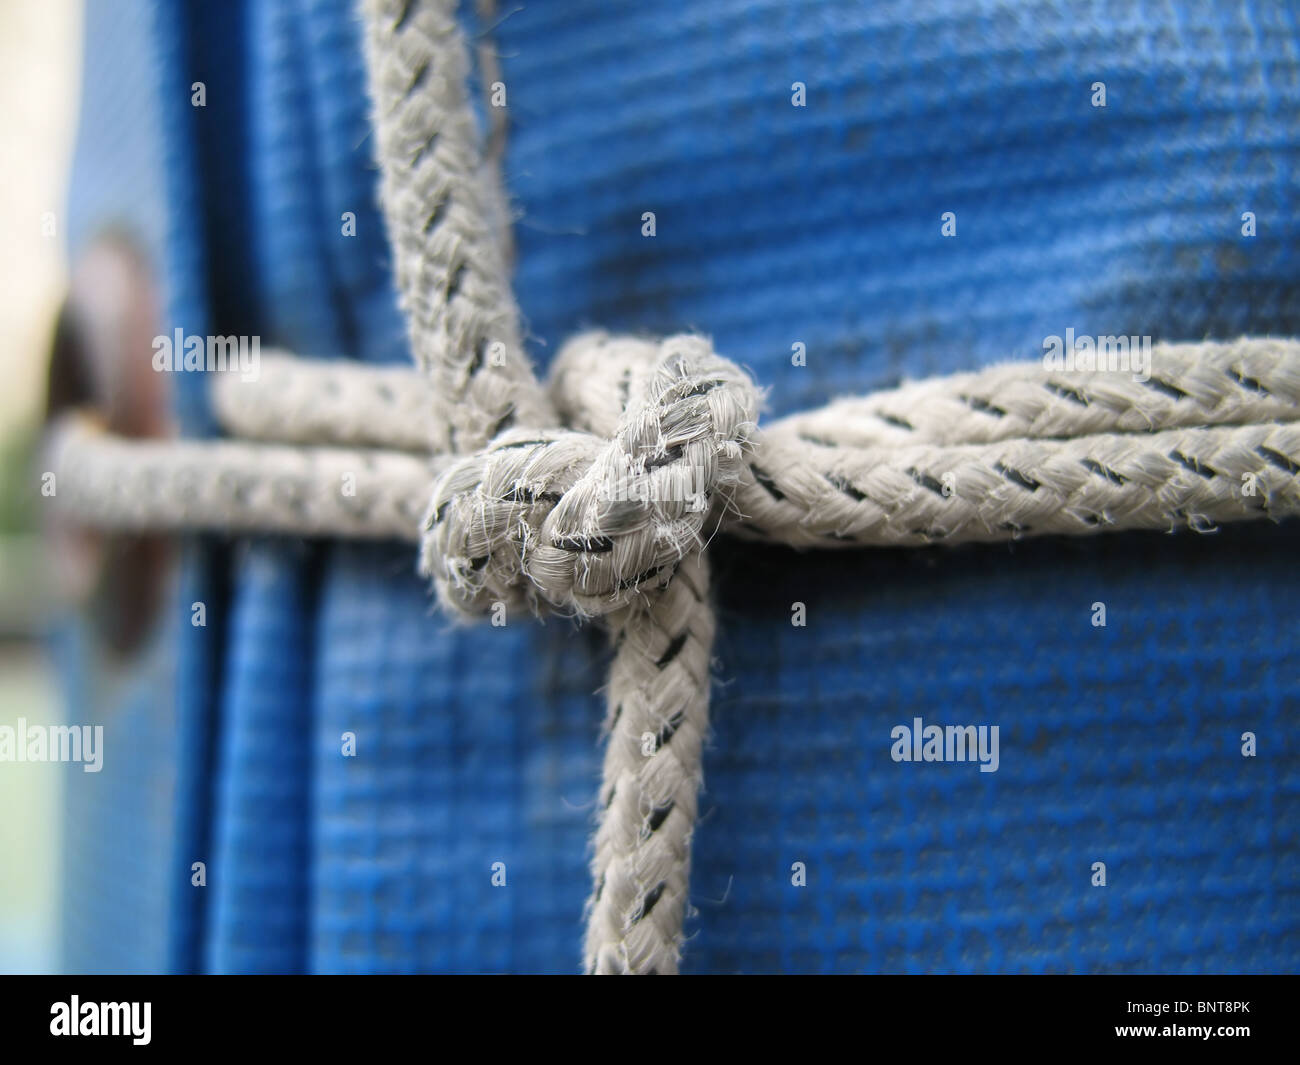 A closeup of a knot made with a strong rope on a blue tarp Stock Photo -  Alamy